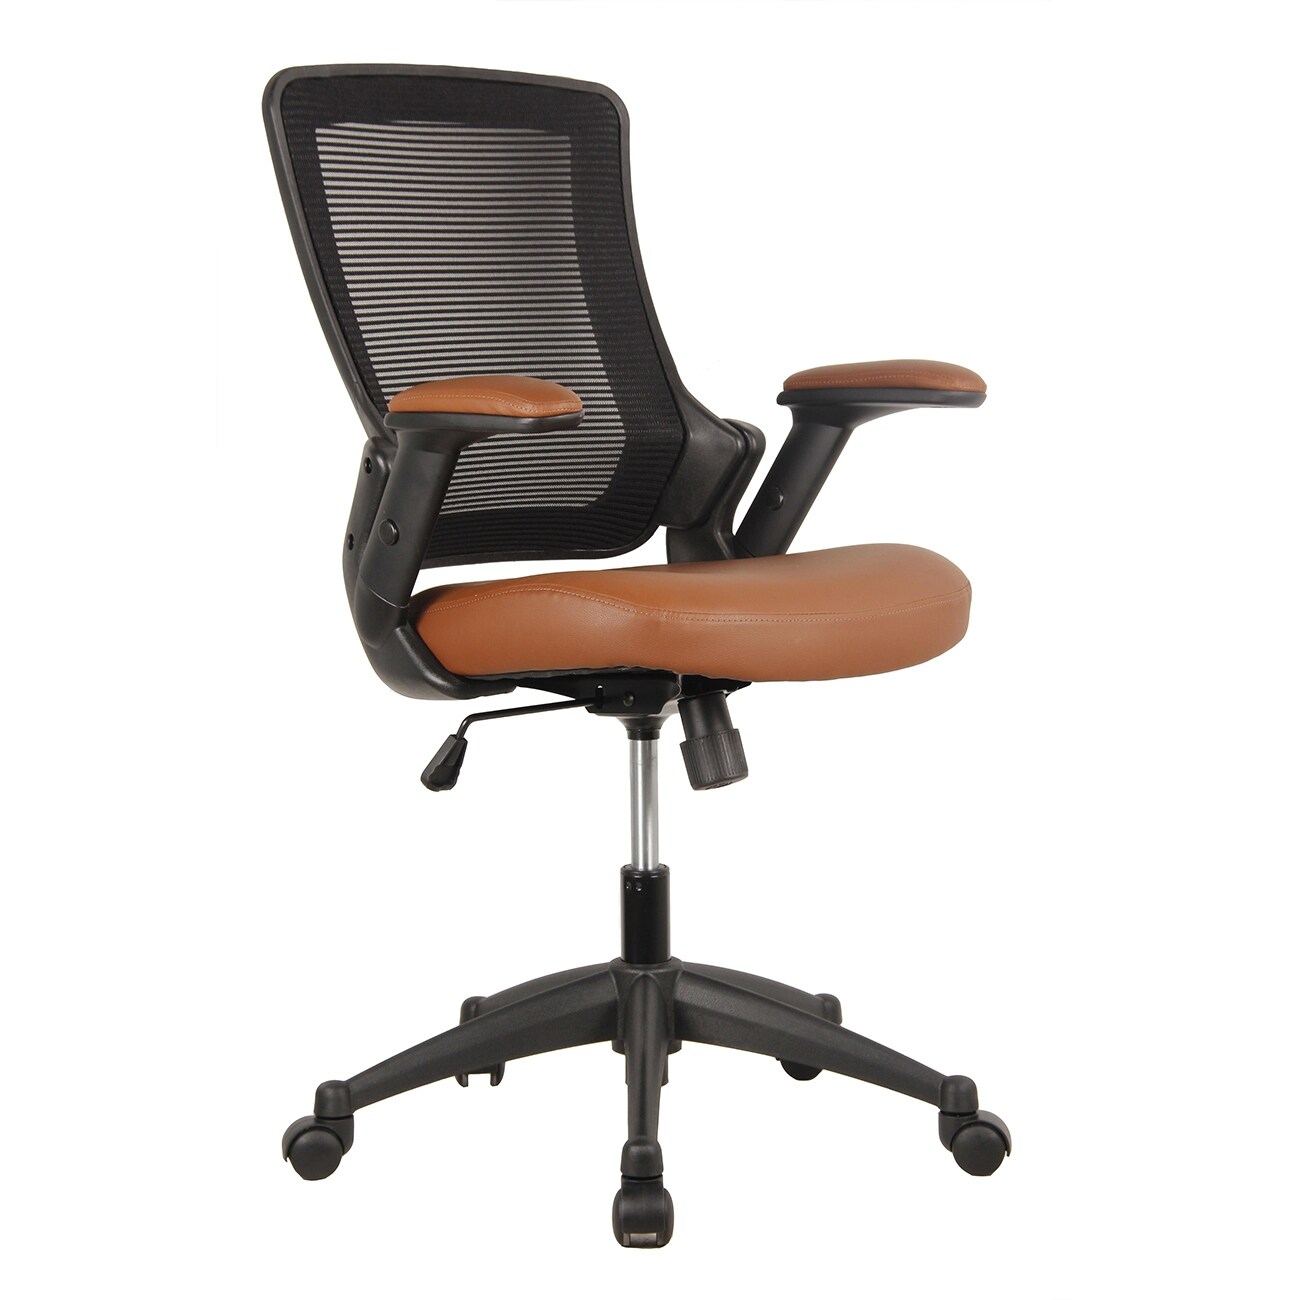 https://ak1.ostkcdn.com/images/products/is/images/direct/9a7f11e670ffbbc3323030a85aa496dc69245f8a/Home-Office-Chair-Ergonomic-Desk-Chair-Mesh-Computer-Chair-with-Lumbar-Support-Armrest%2C-Executive-Adjustable-Mid-Back-Task-Chair.jpg